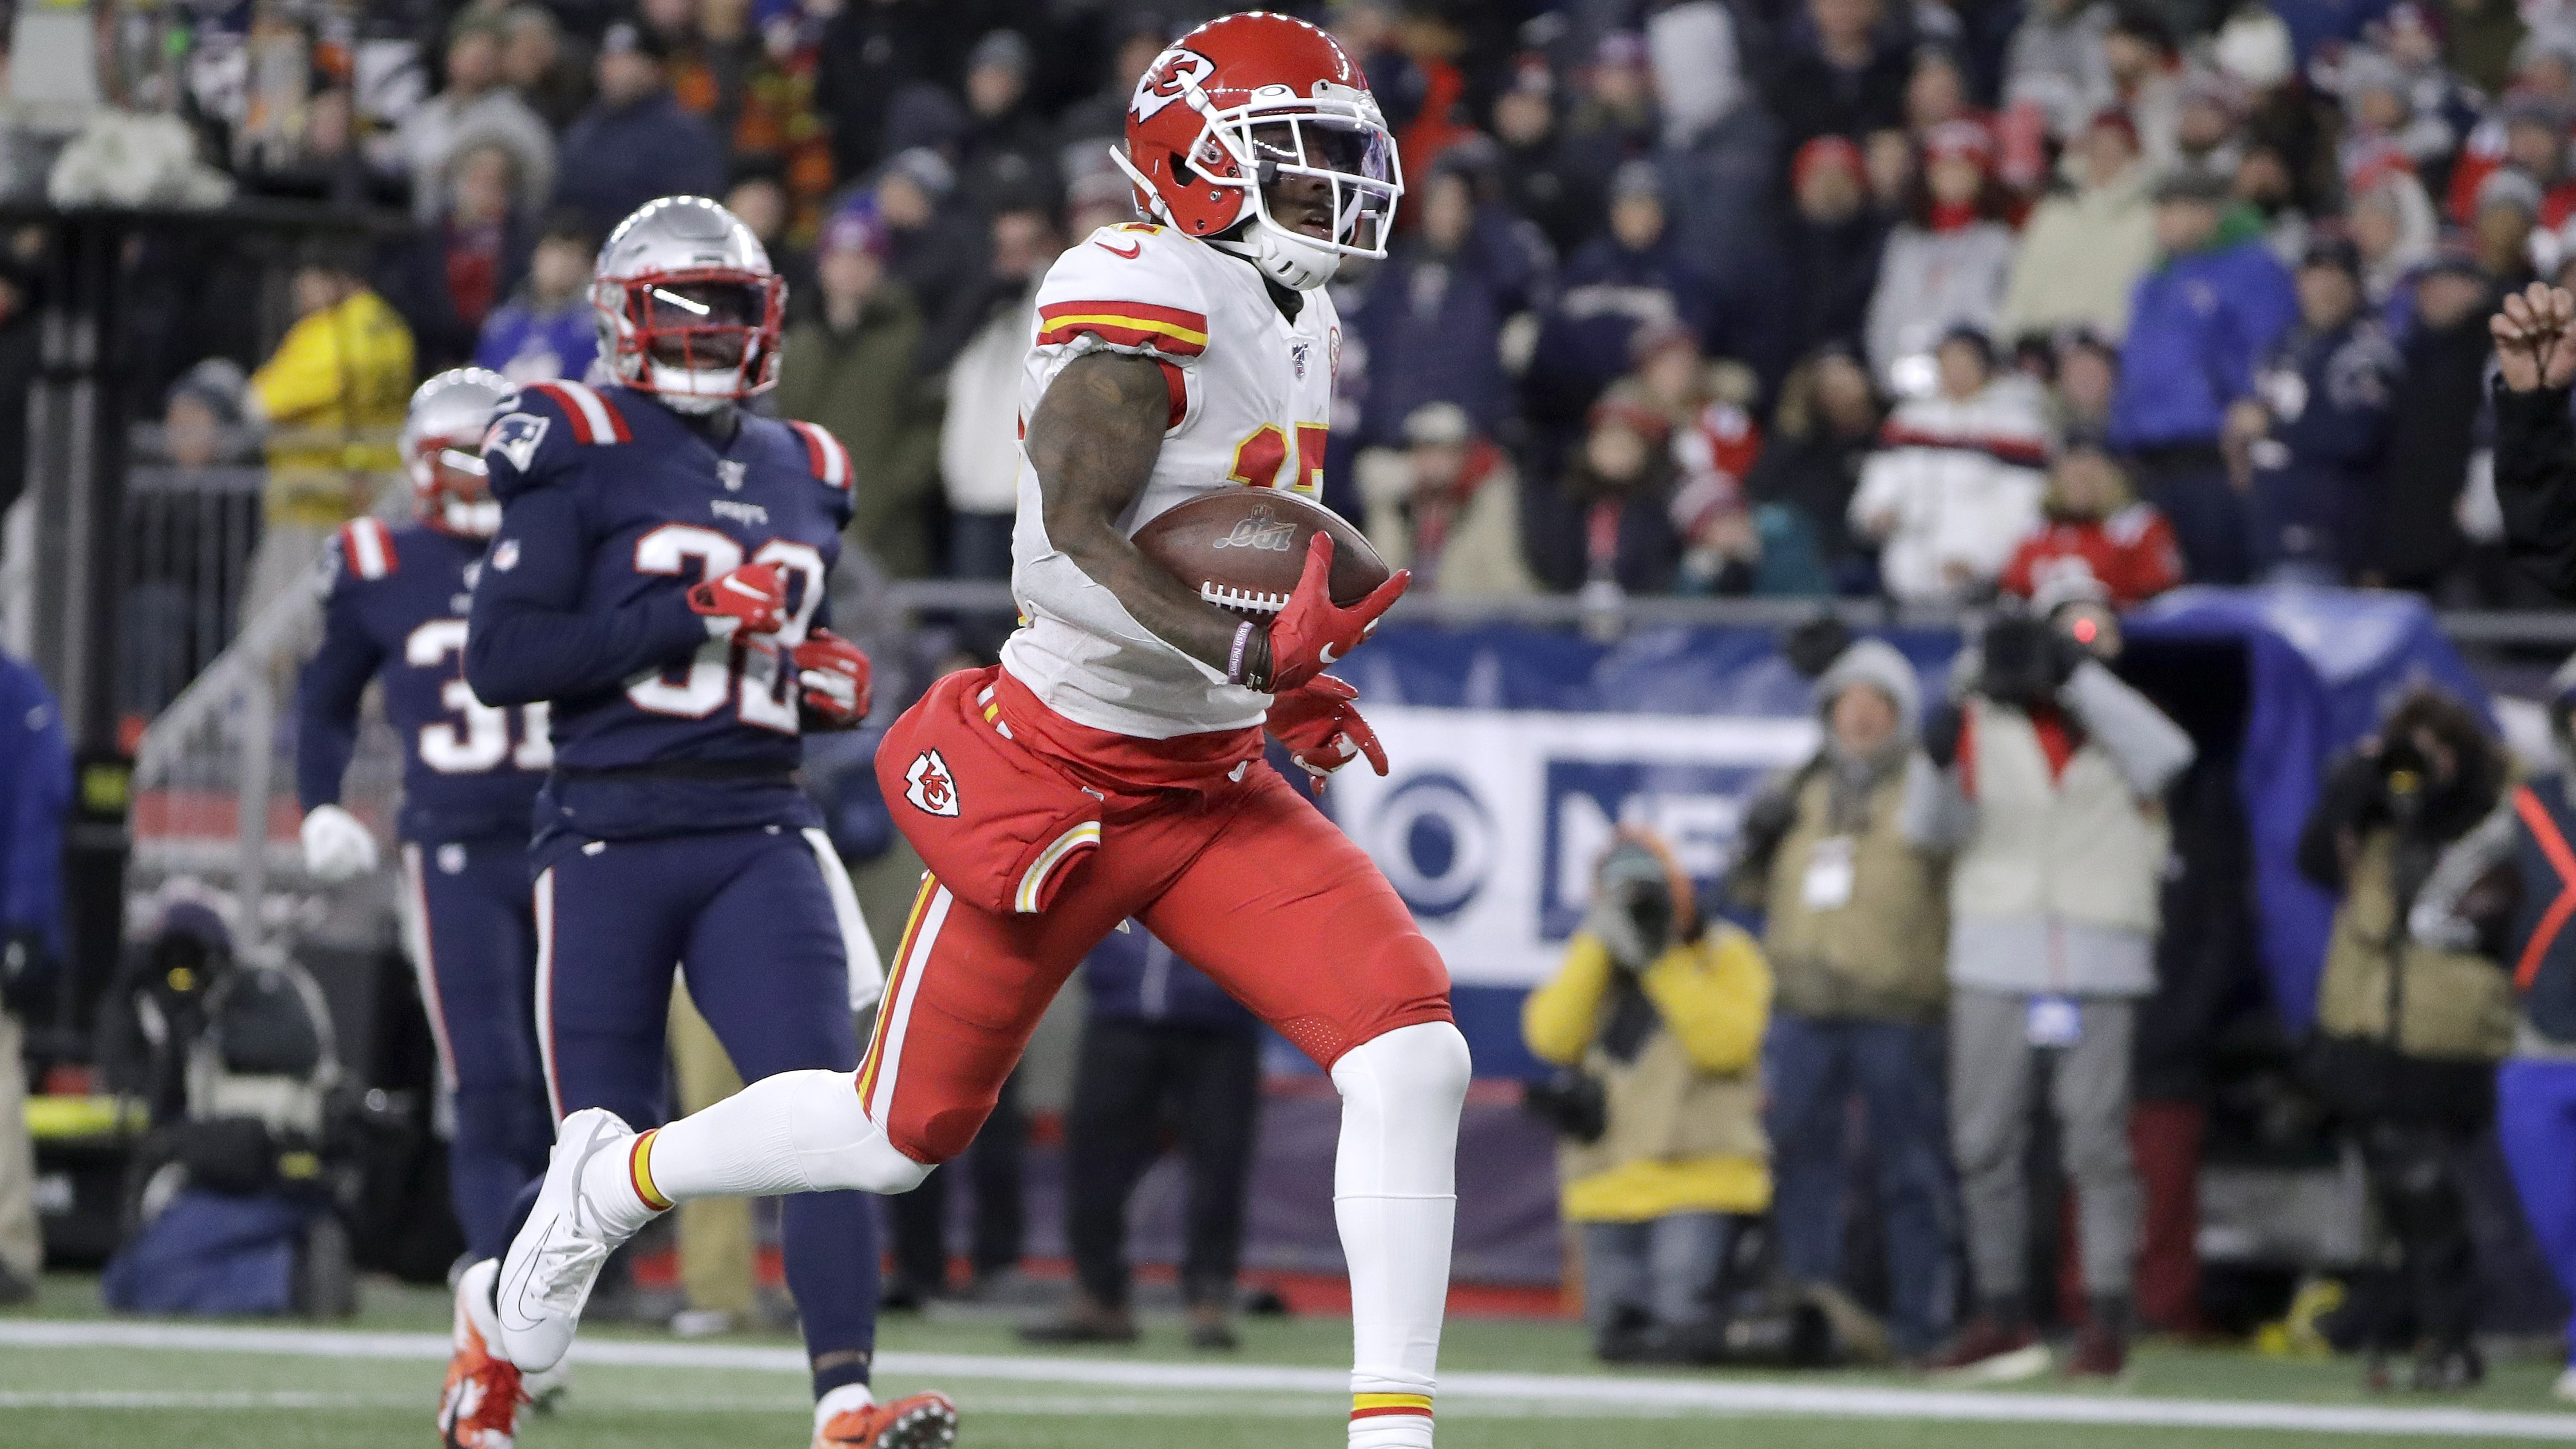 Chiefs clinch AFC West title with 23-16 win over Patriots